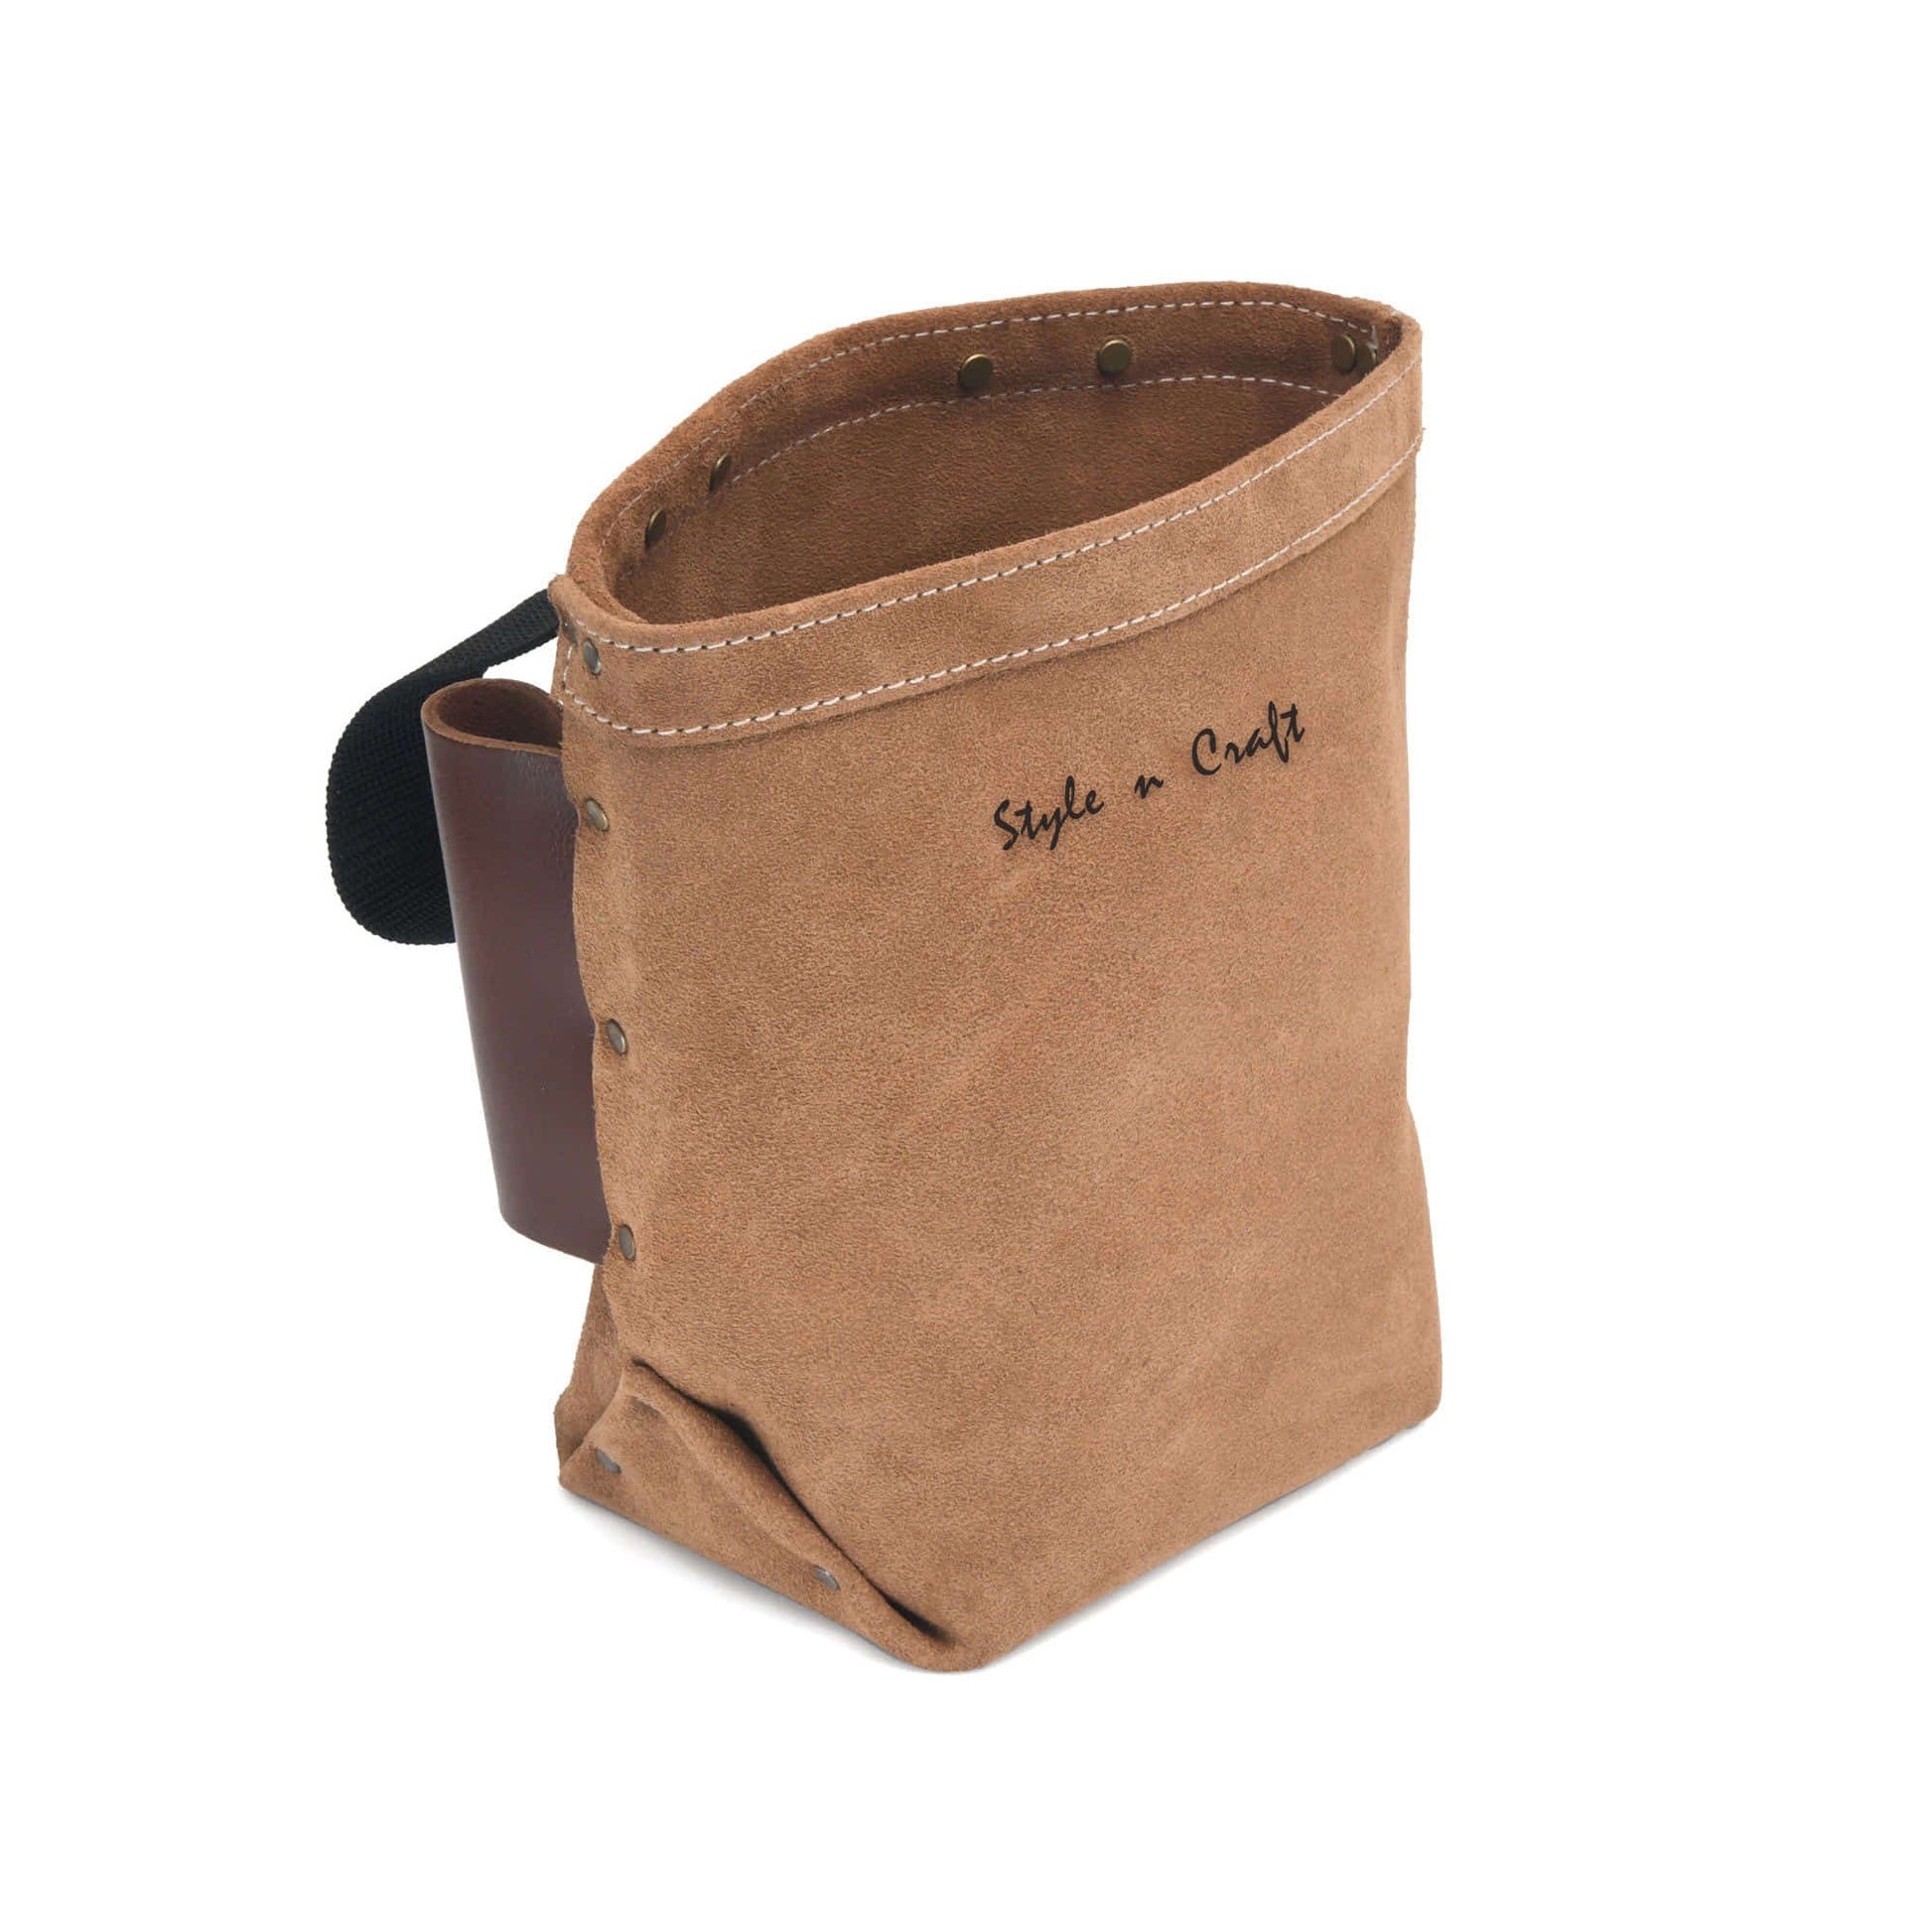 Style n Craft 88515 - Iron Worker's Bolt Bag in Heavy Duty Suede Leather in Dark Tan Color with Double Bull Pin Full Grain Leather Loops - Front Angled View